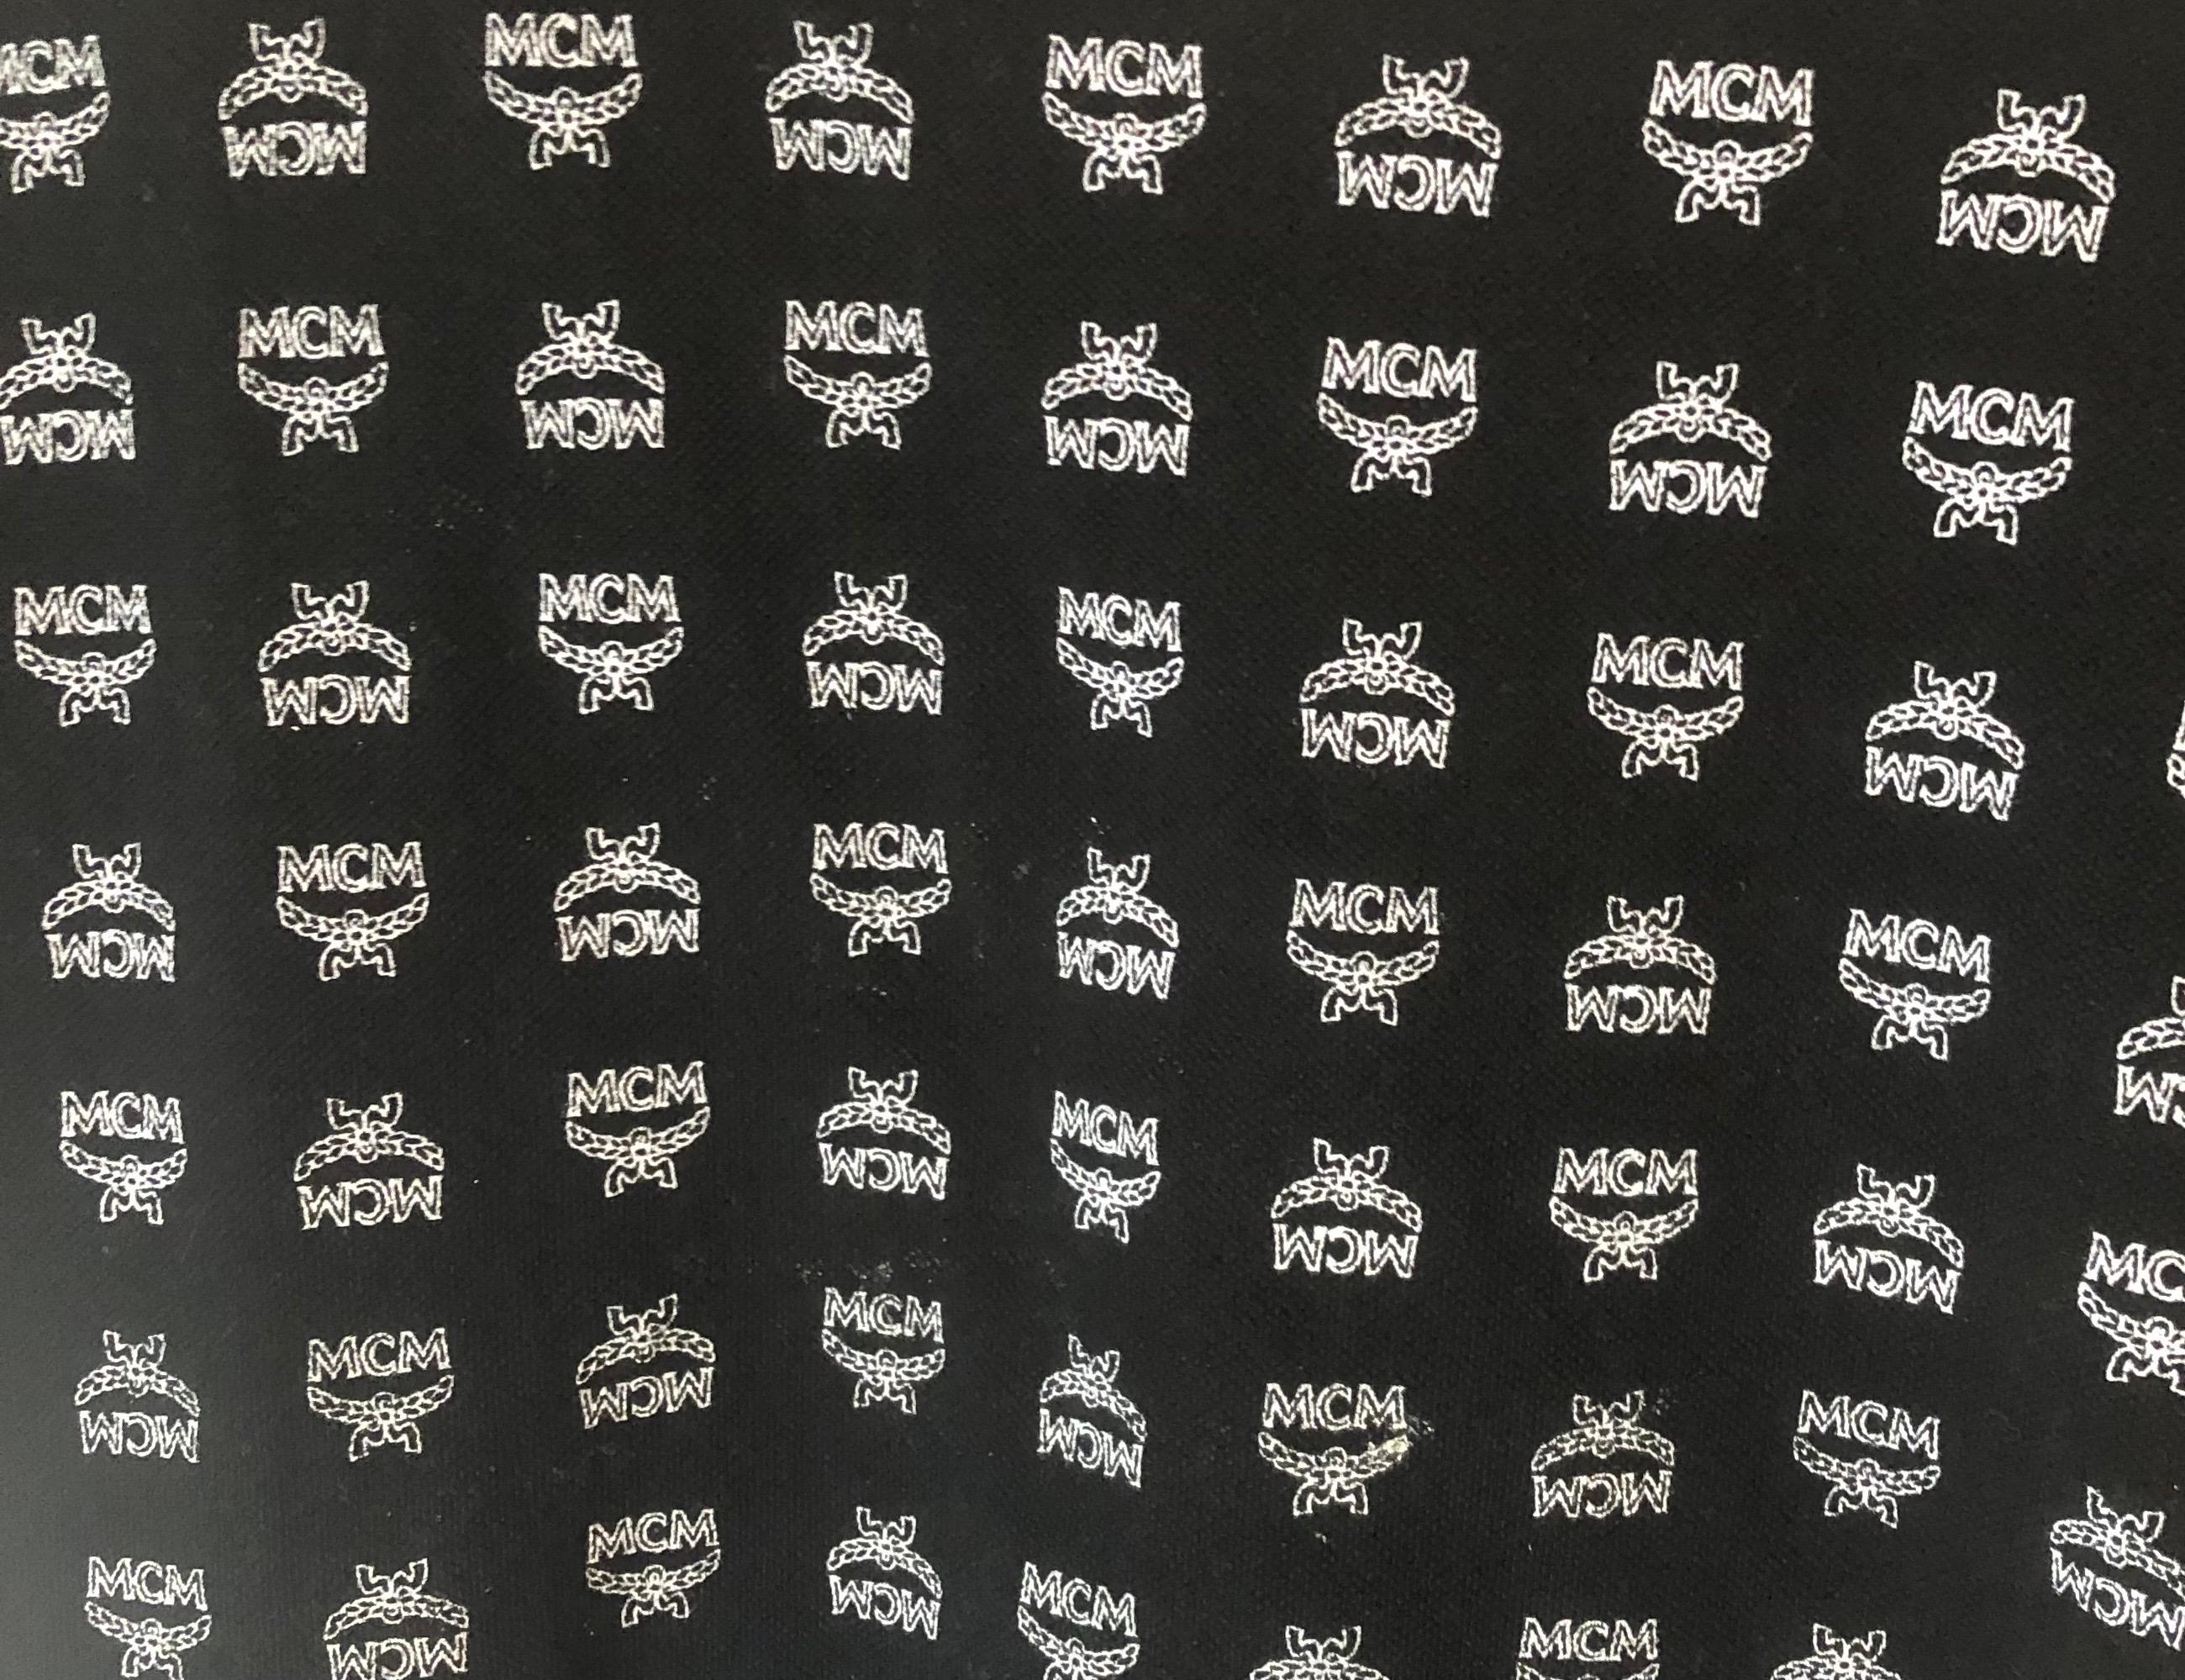 Rare Vintage MCM Logo T-shirt Black and White  In Good Condition For Sale In Hoffman Estates, IL